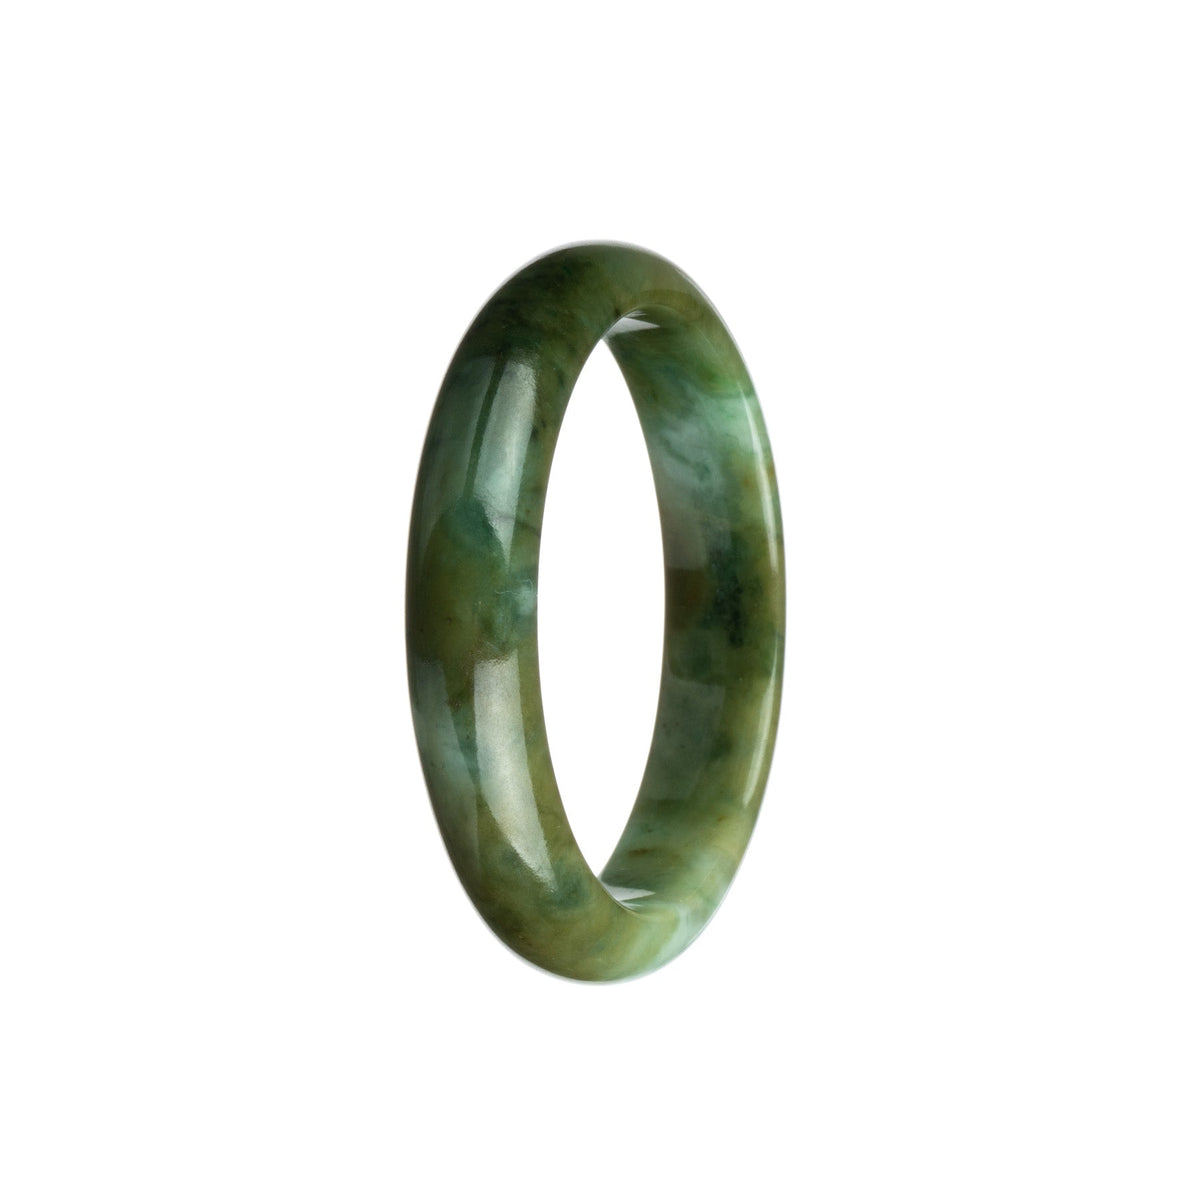 A close-up photo of an olive green bangle bracelet made of natural Burma jade. The bracelet is in the shape of a half moon and has an authentic and earthy feel.